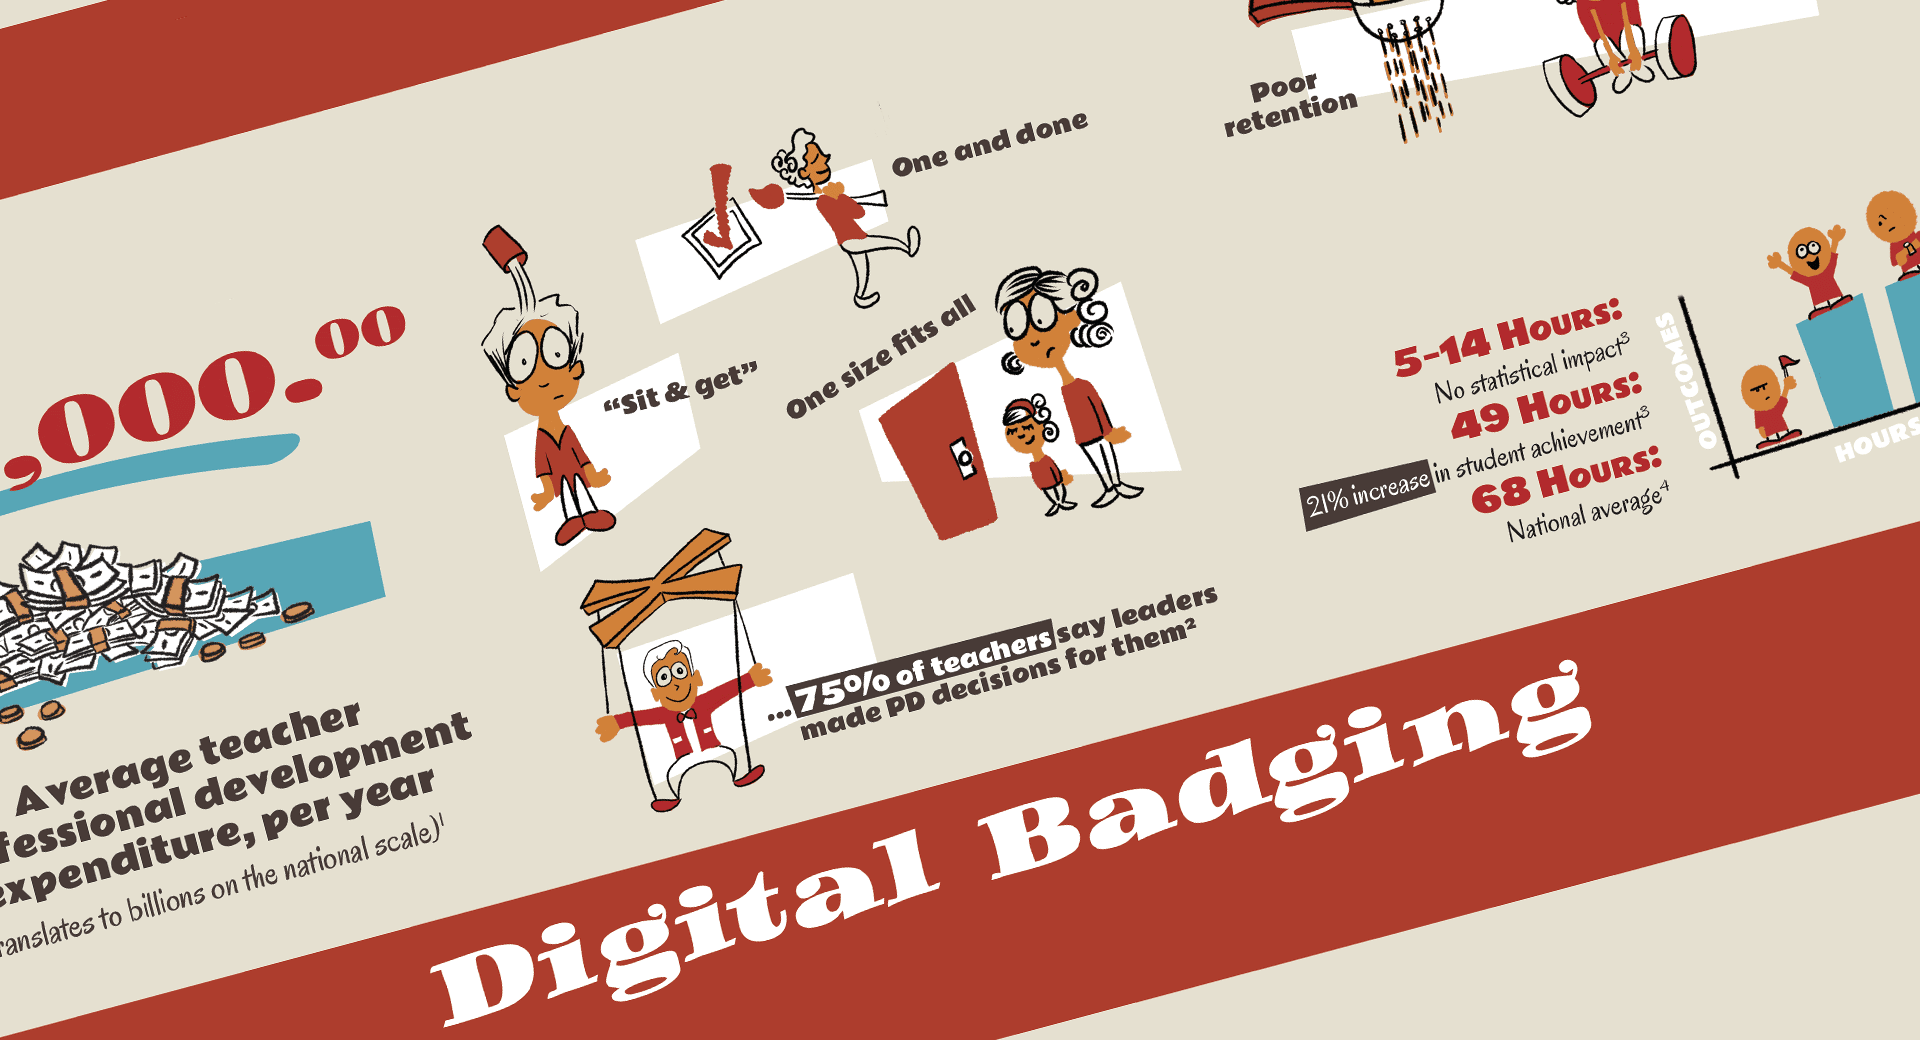 One-Page Pitch: Digital Badging